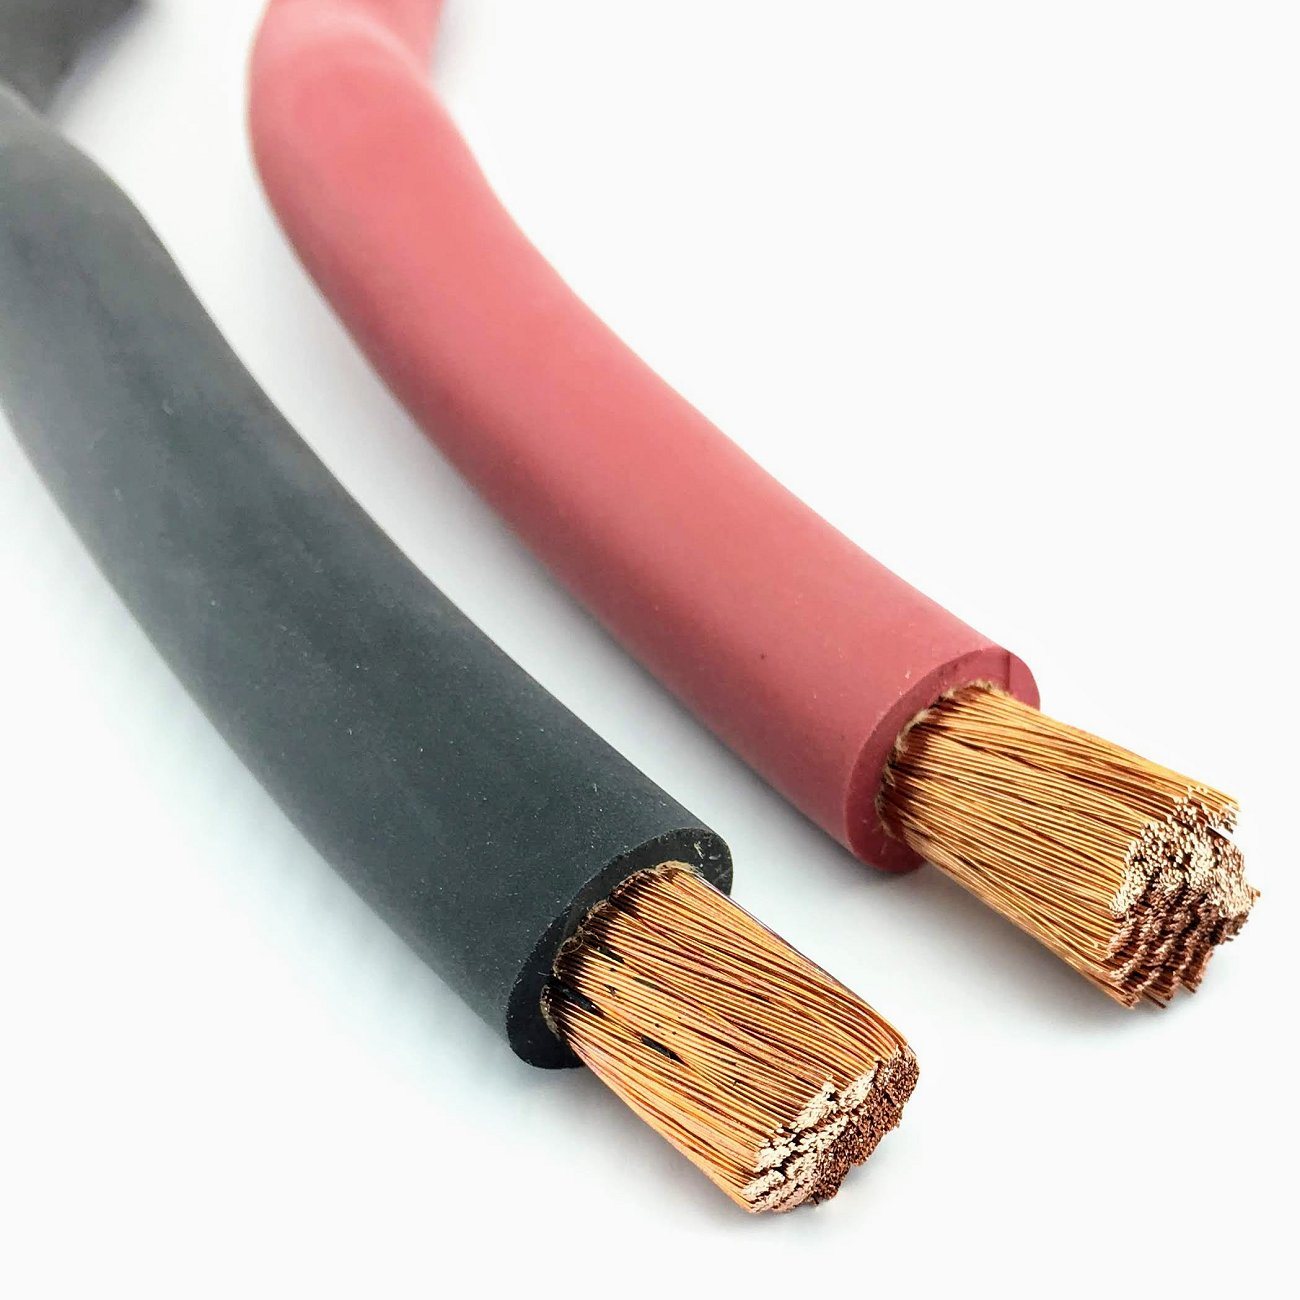 37*2.5mm2 H07rn-F Multicore Type 450/750V Epr/Pcp Trailing Rubber Cable